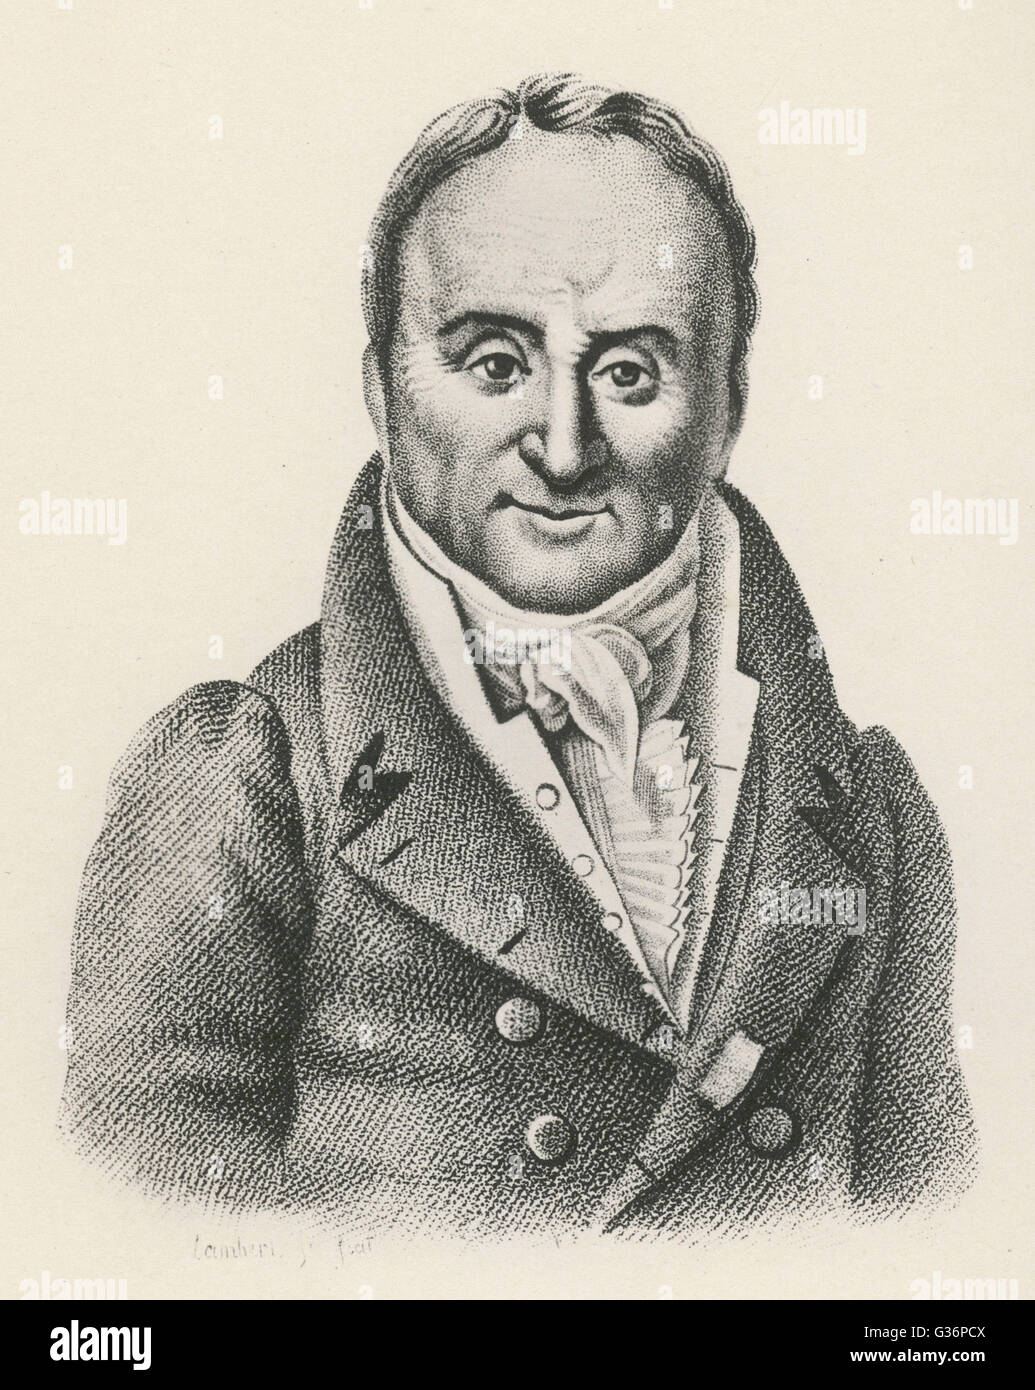 Philippe Pinel, French physician, known for his reforms in the treatment of mental patients. He contributed to the classification of mental disorders, and is regarded by some as the father of modern psychiatry.      Date: 1745 - 1826 Stock Photo